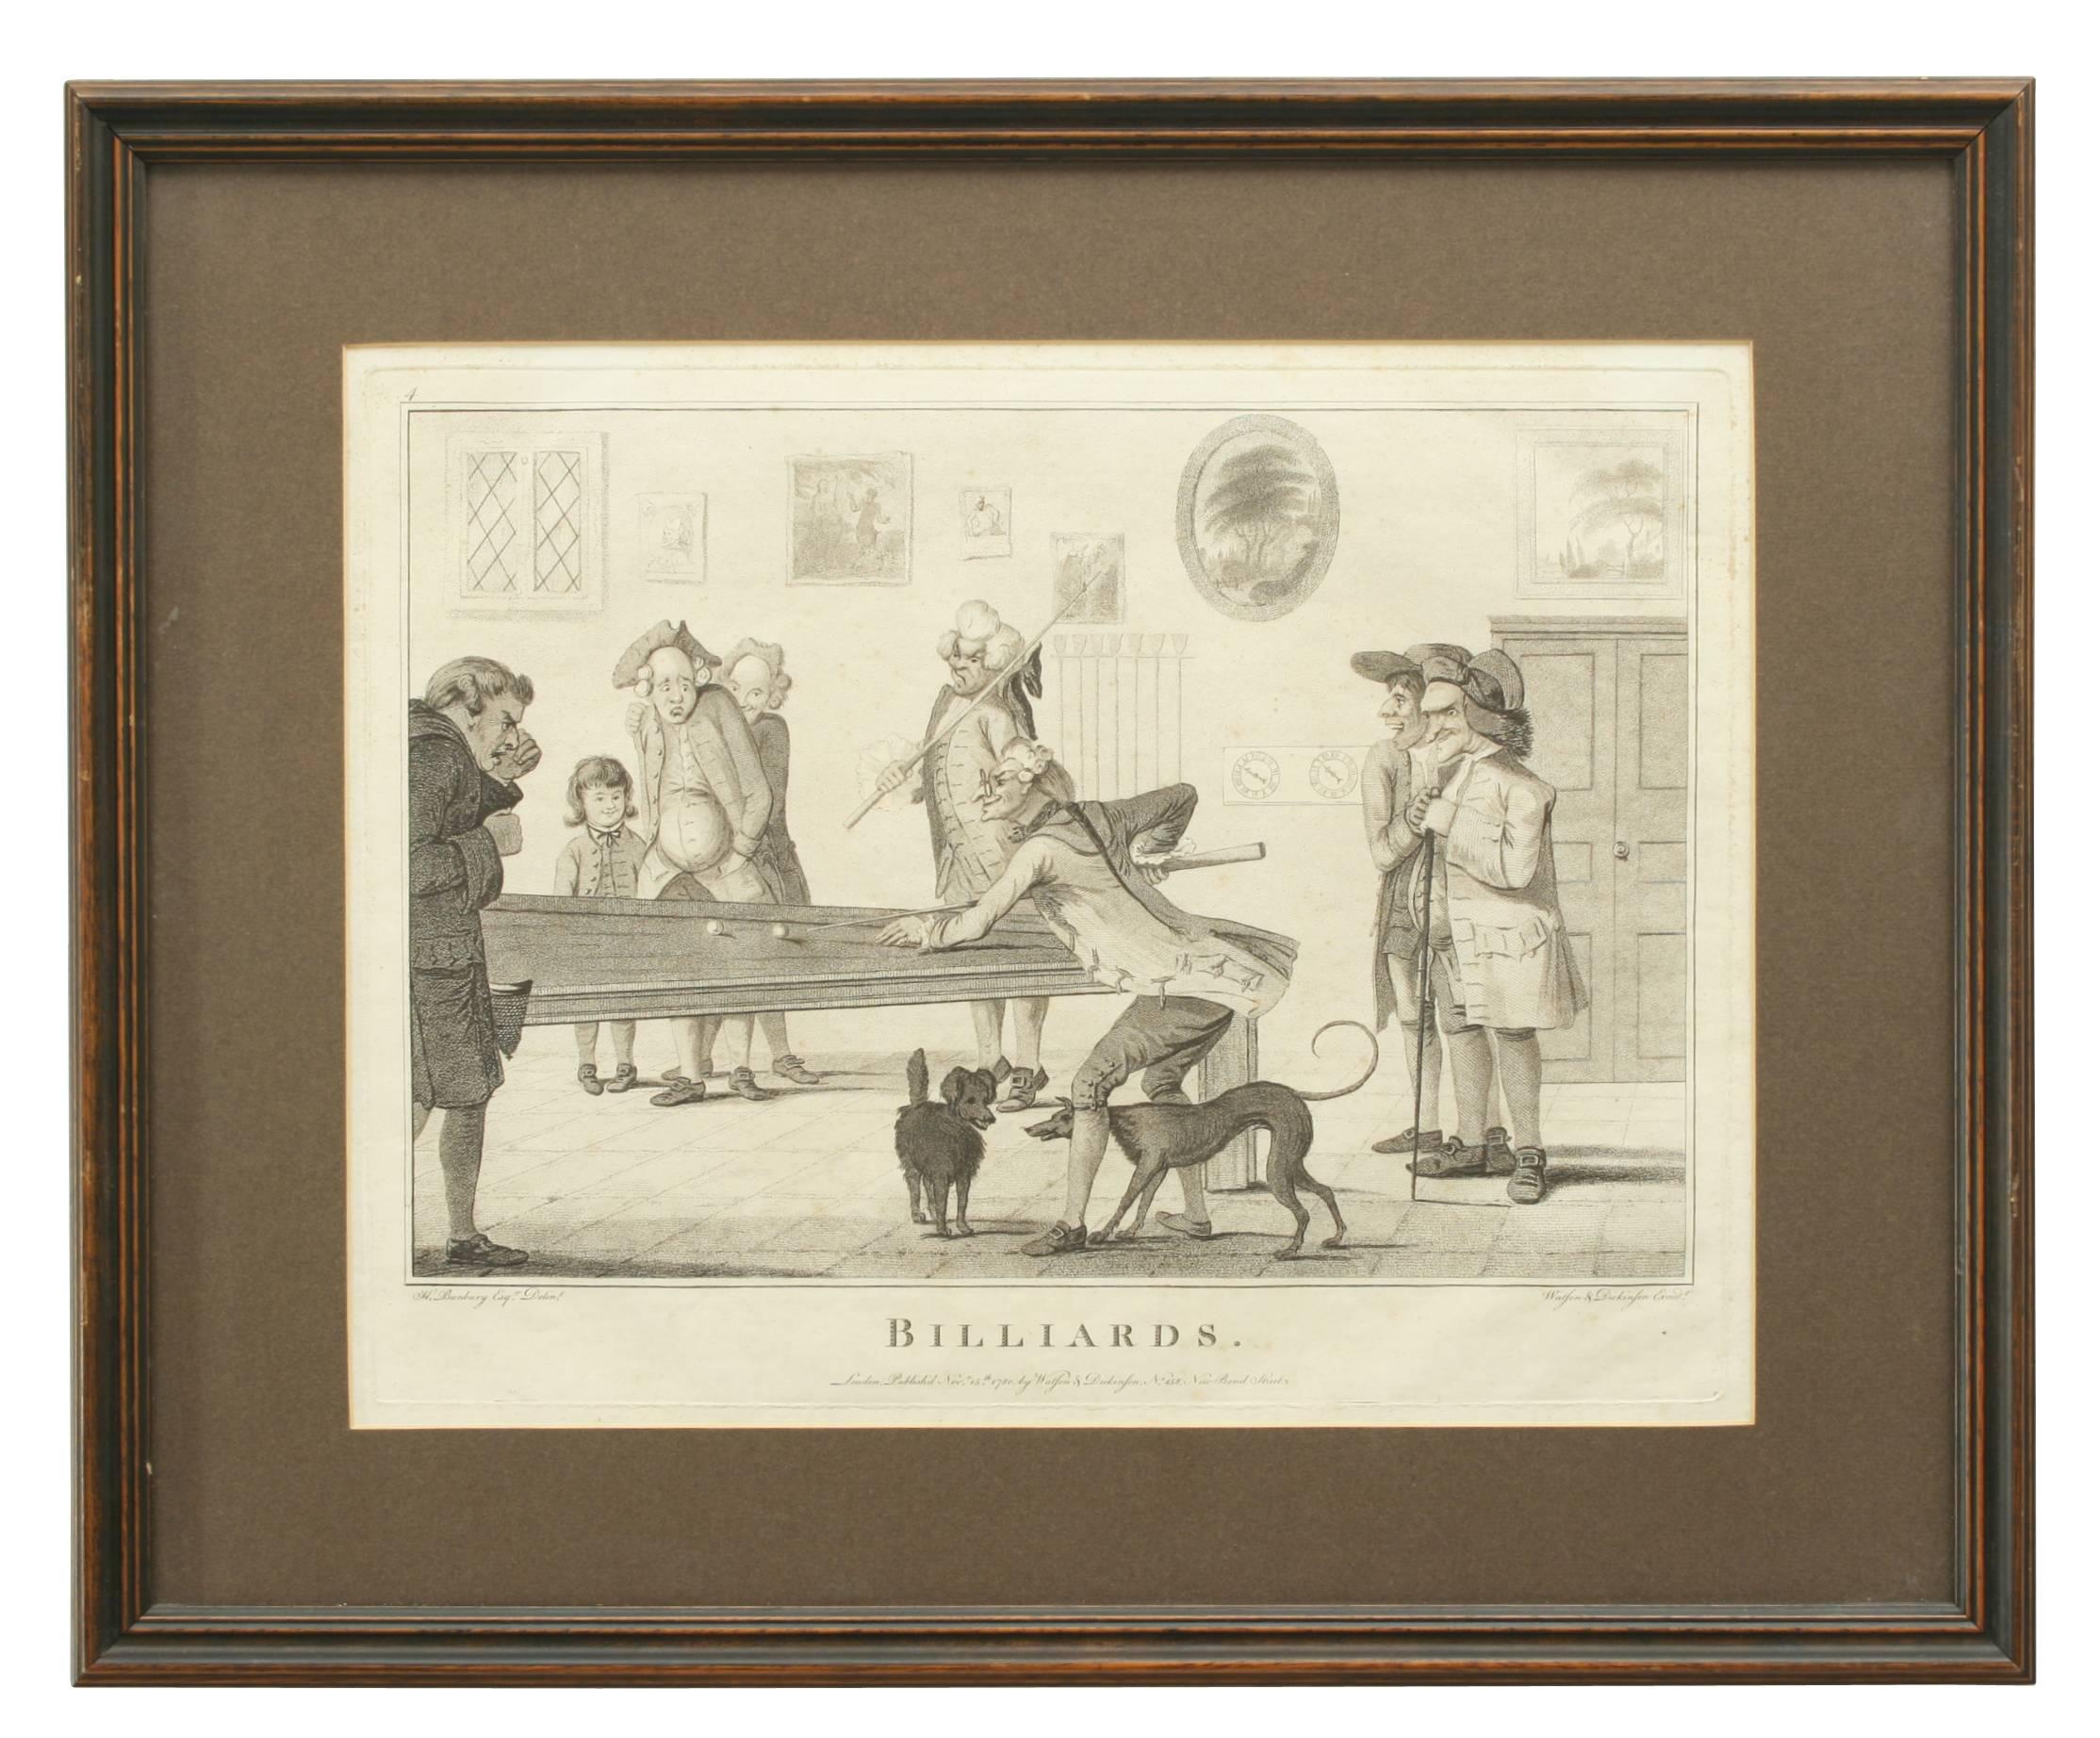 Billiard engraving after Henry Bunbury.
A framed and mounted stipple engraving after Henry Bunbury entitled 'Billiards'. The characterised picture depicts a group of men in the throws of a billiard match. Note they are playing with a more